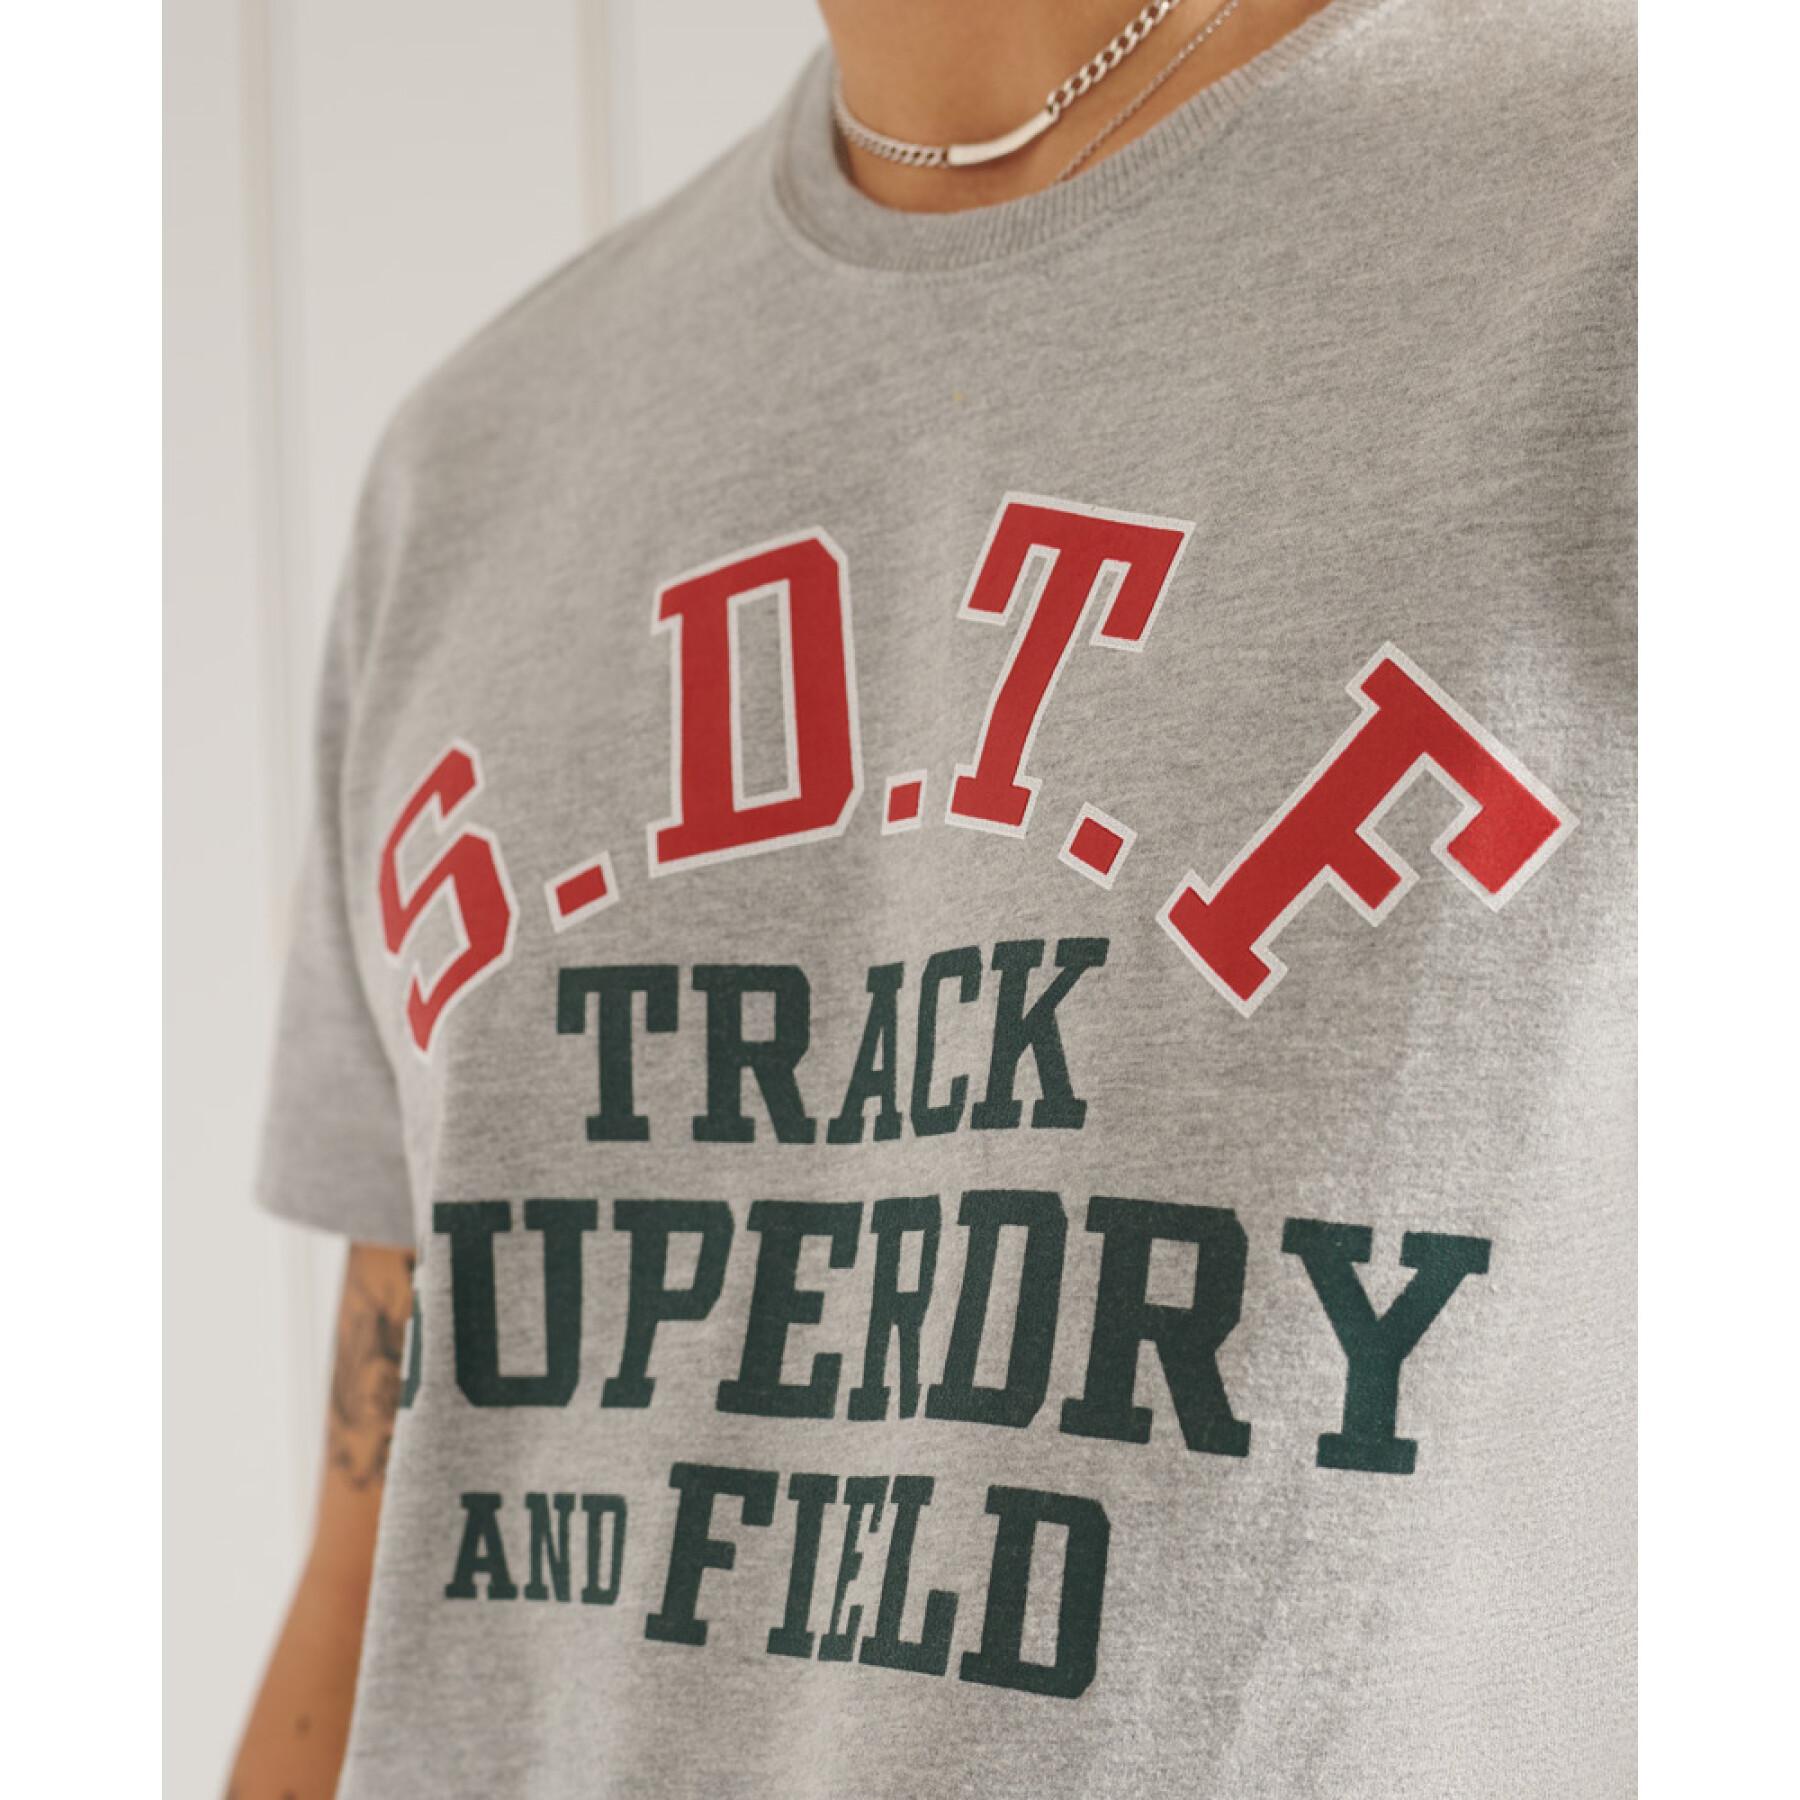 T-shirt Superdry Track & Field